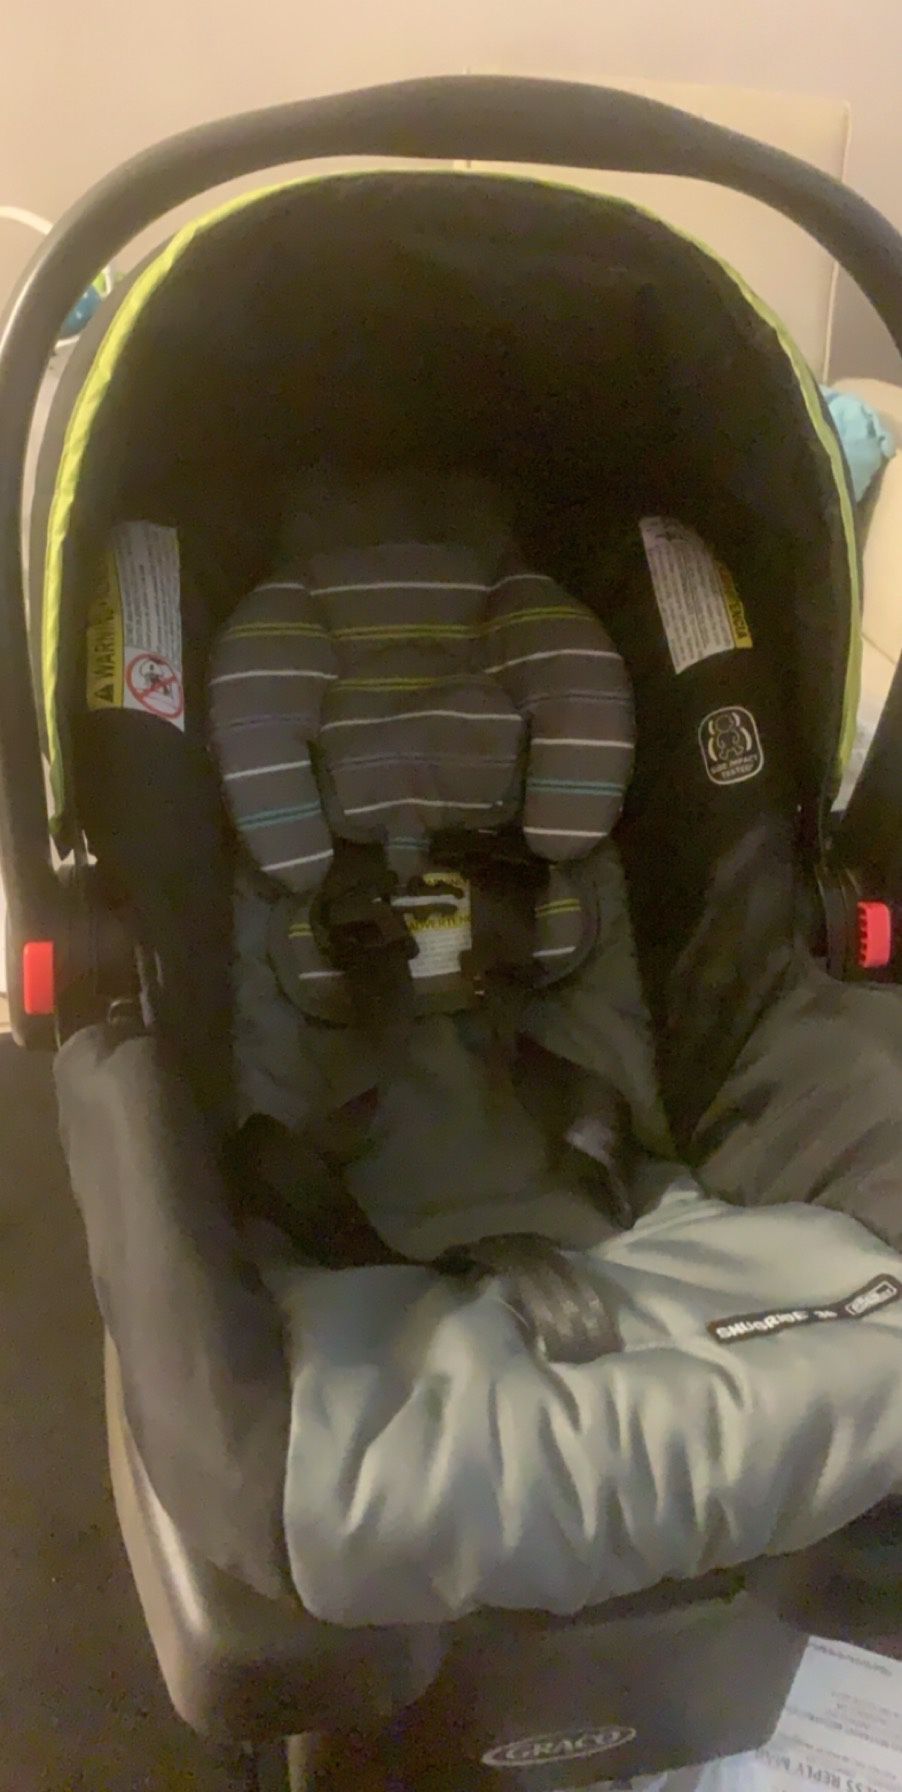 Graco Car seat and stroller combo